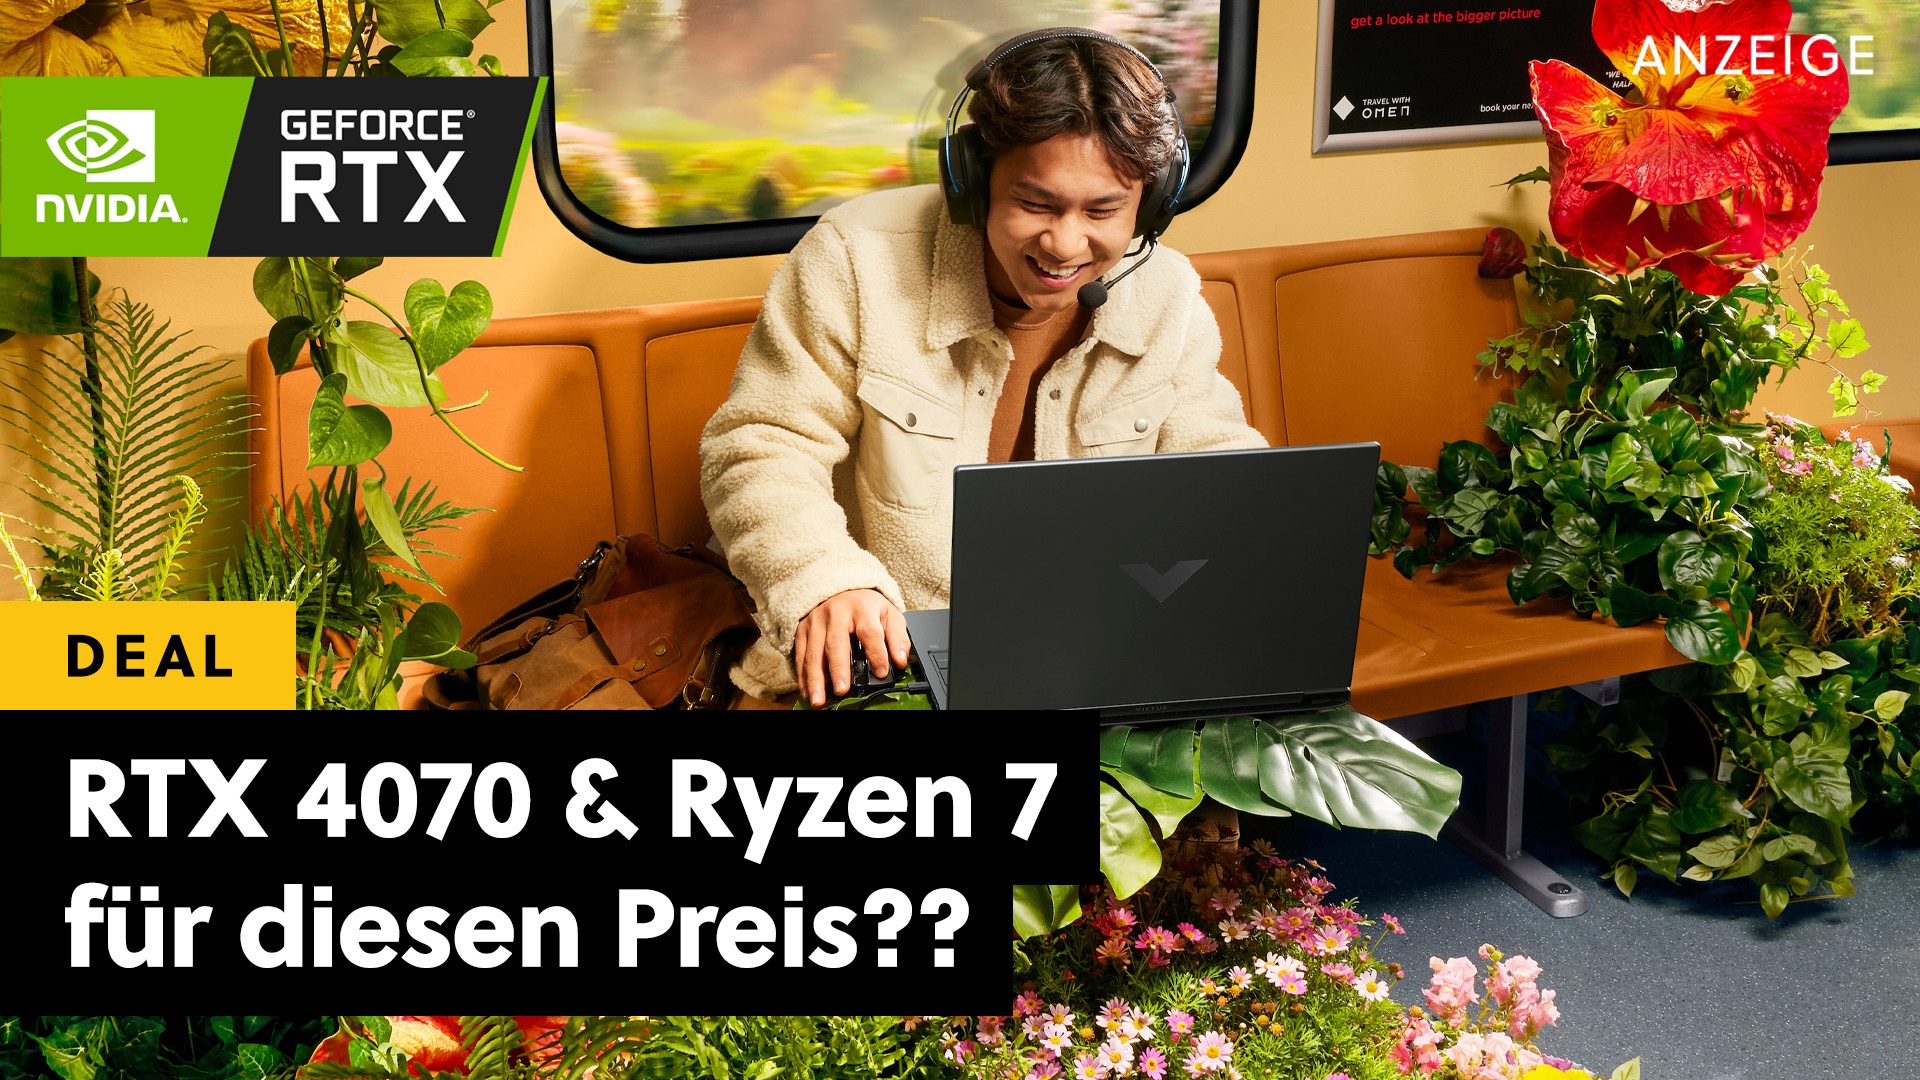 How can this gaming laptop with RTX 4070 and Ryzen 7 be so cheap?!